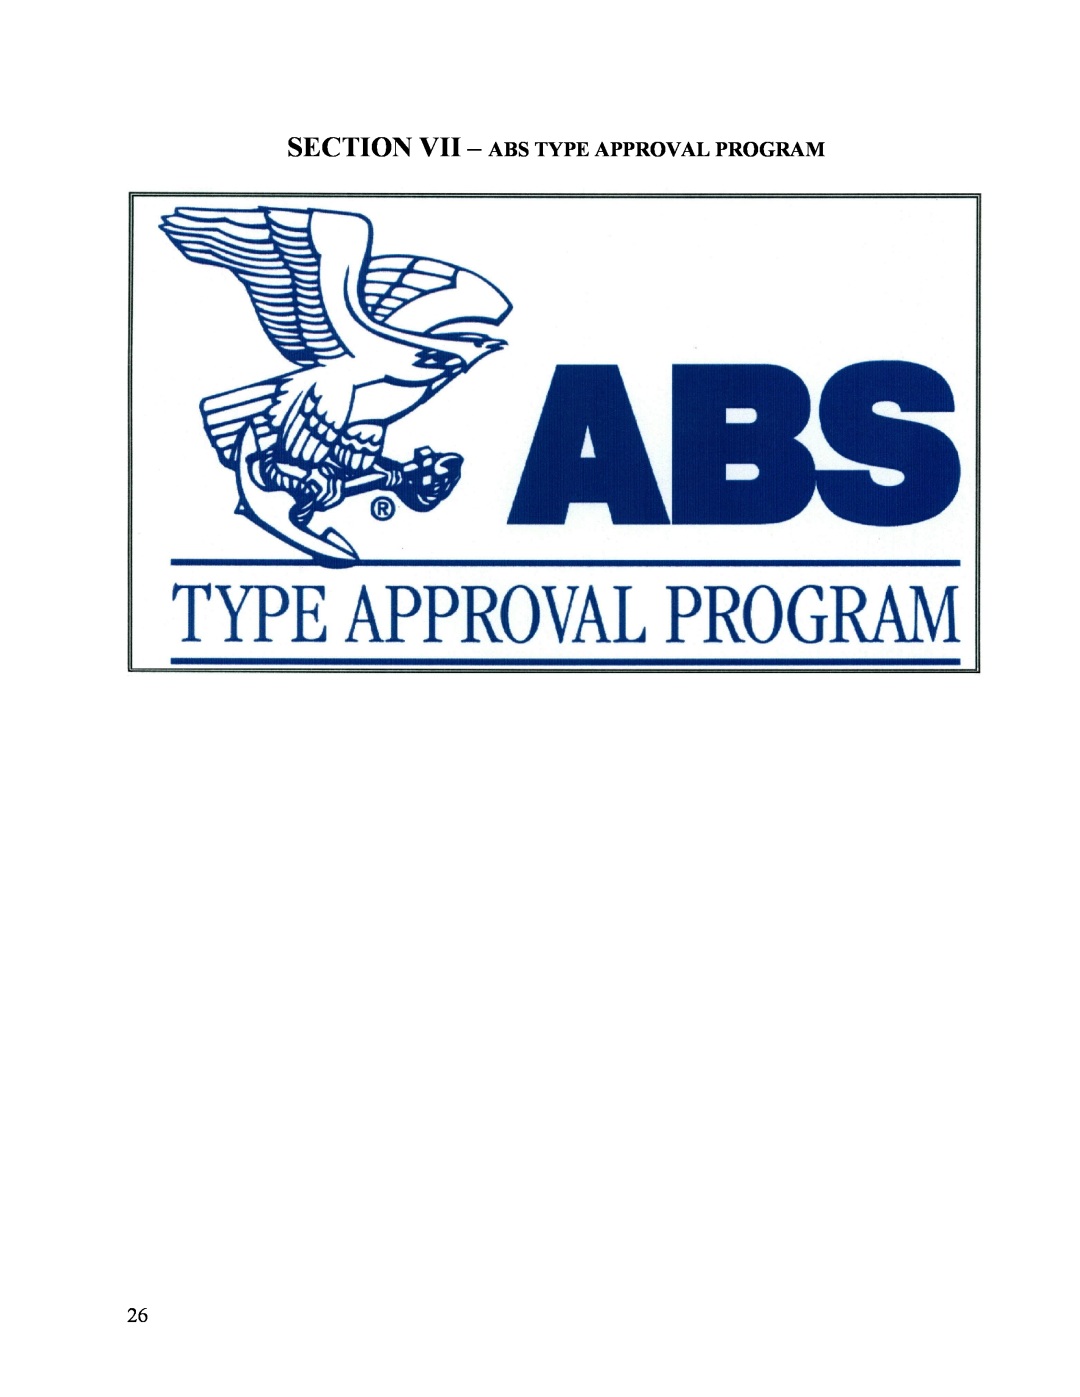 Hubbell Electric Heater Company ME manual Section Vii - Abs Type Approval Program 